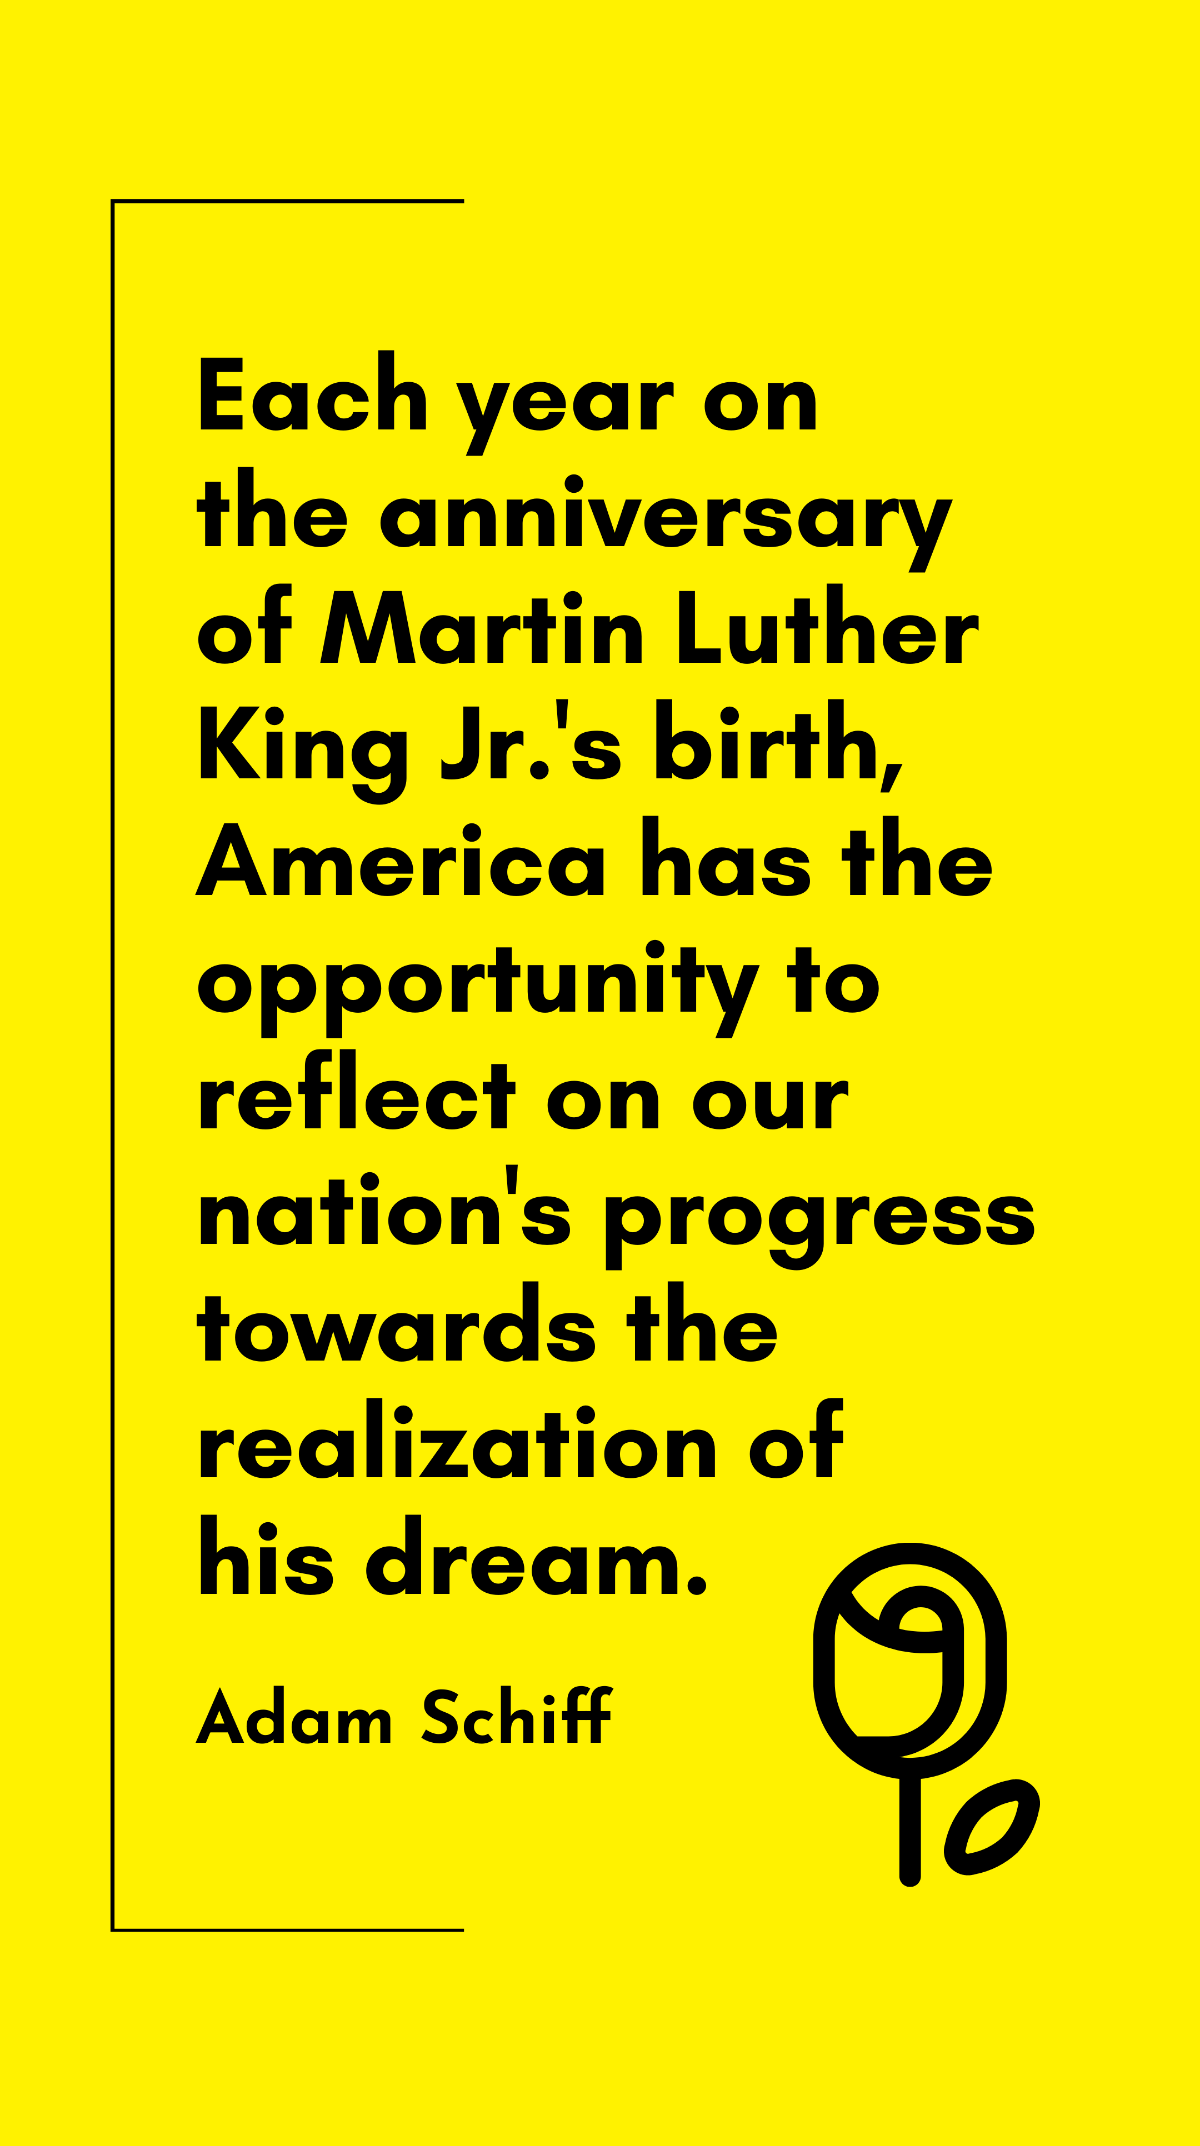 Adam Schiff - Each year on the anniversary of Martin Luther King Jr.'s birth, America has the opportunity to reflect on our nation's progress towards the realization of his dream.